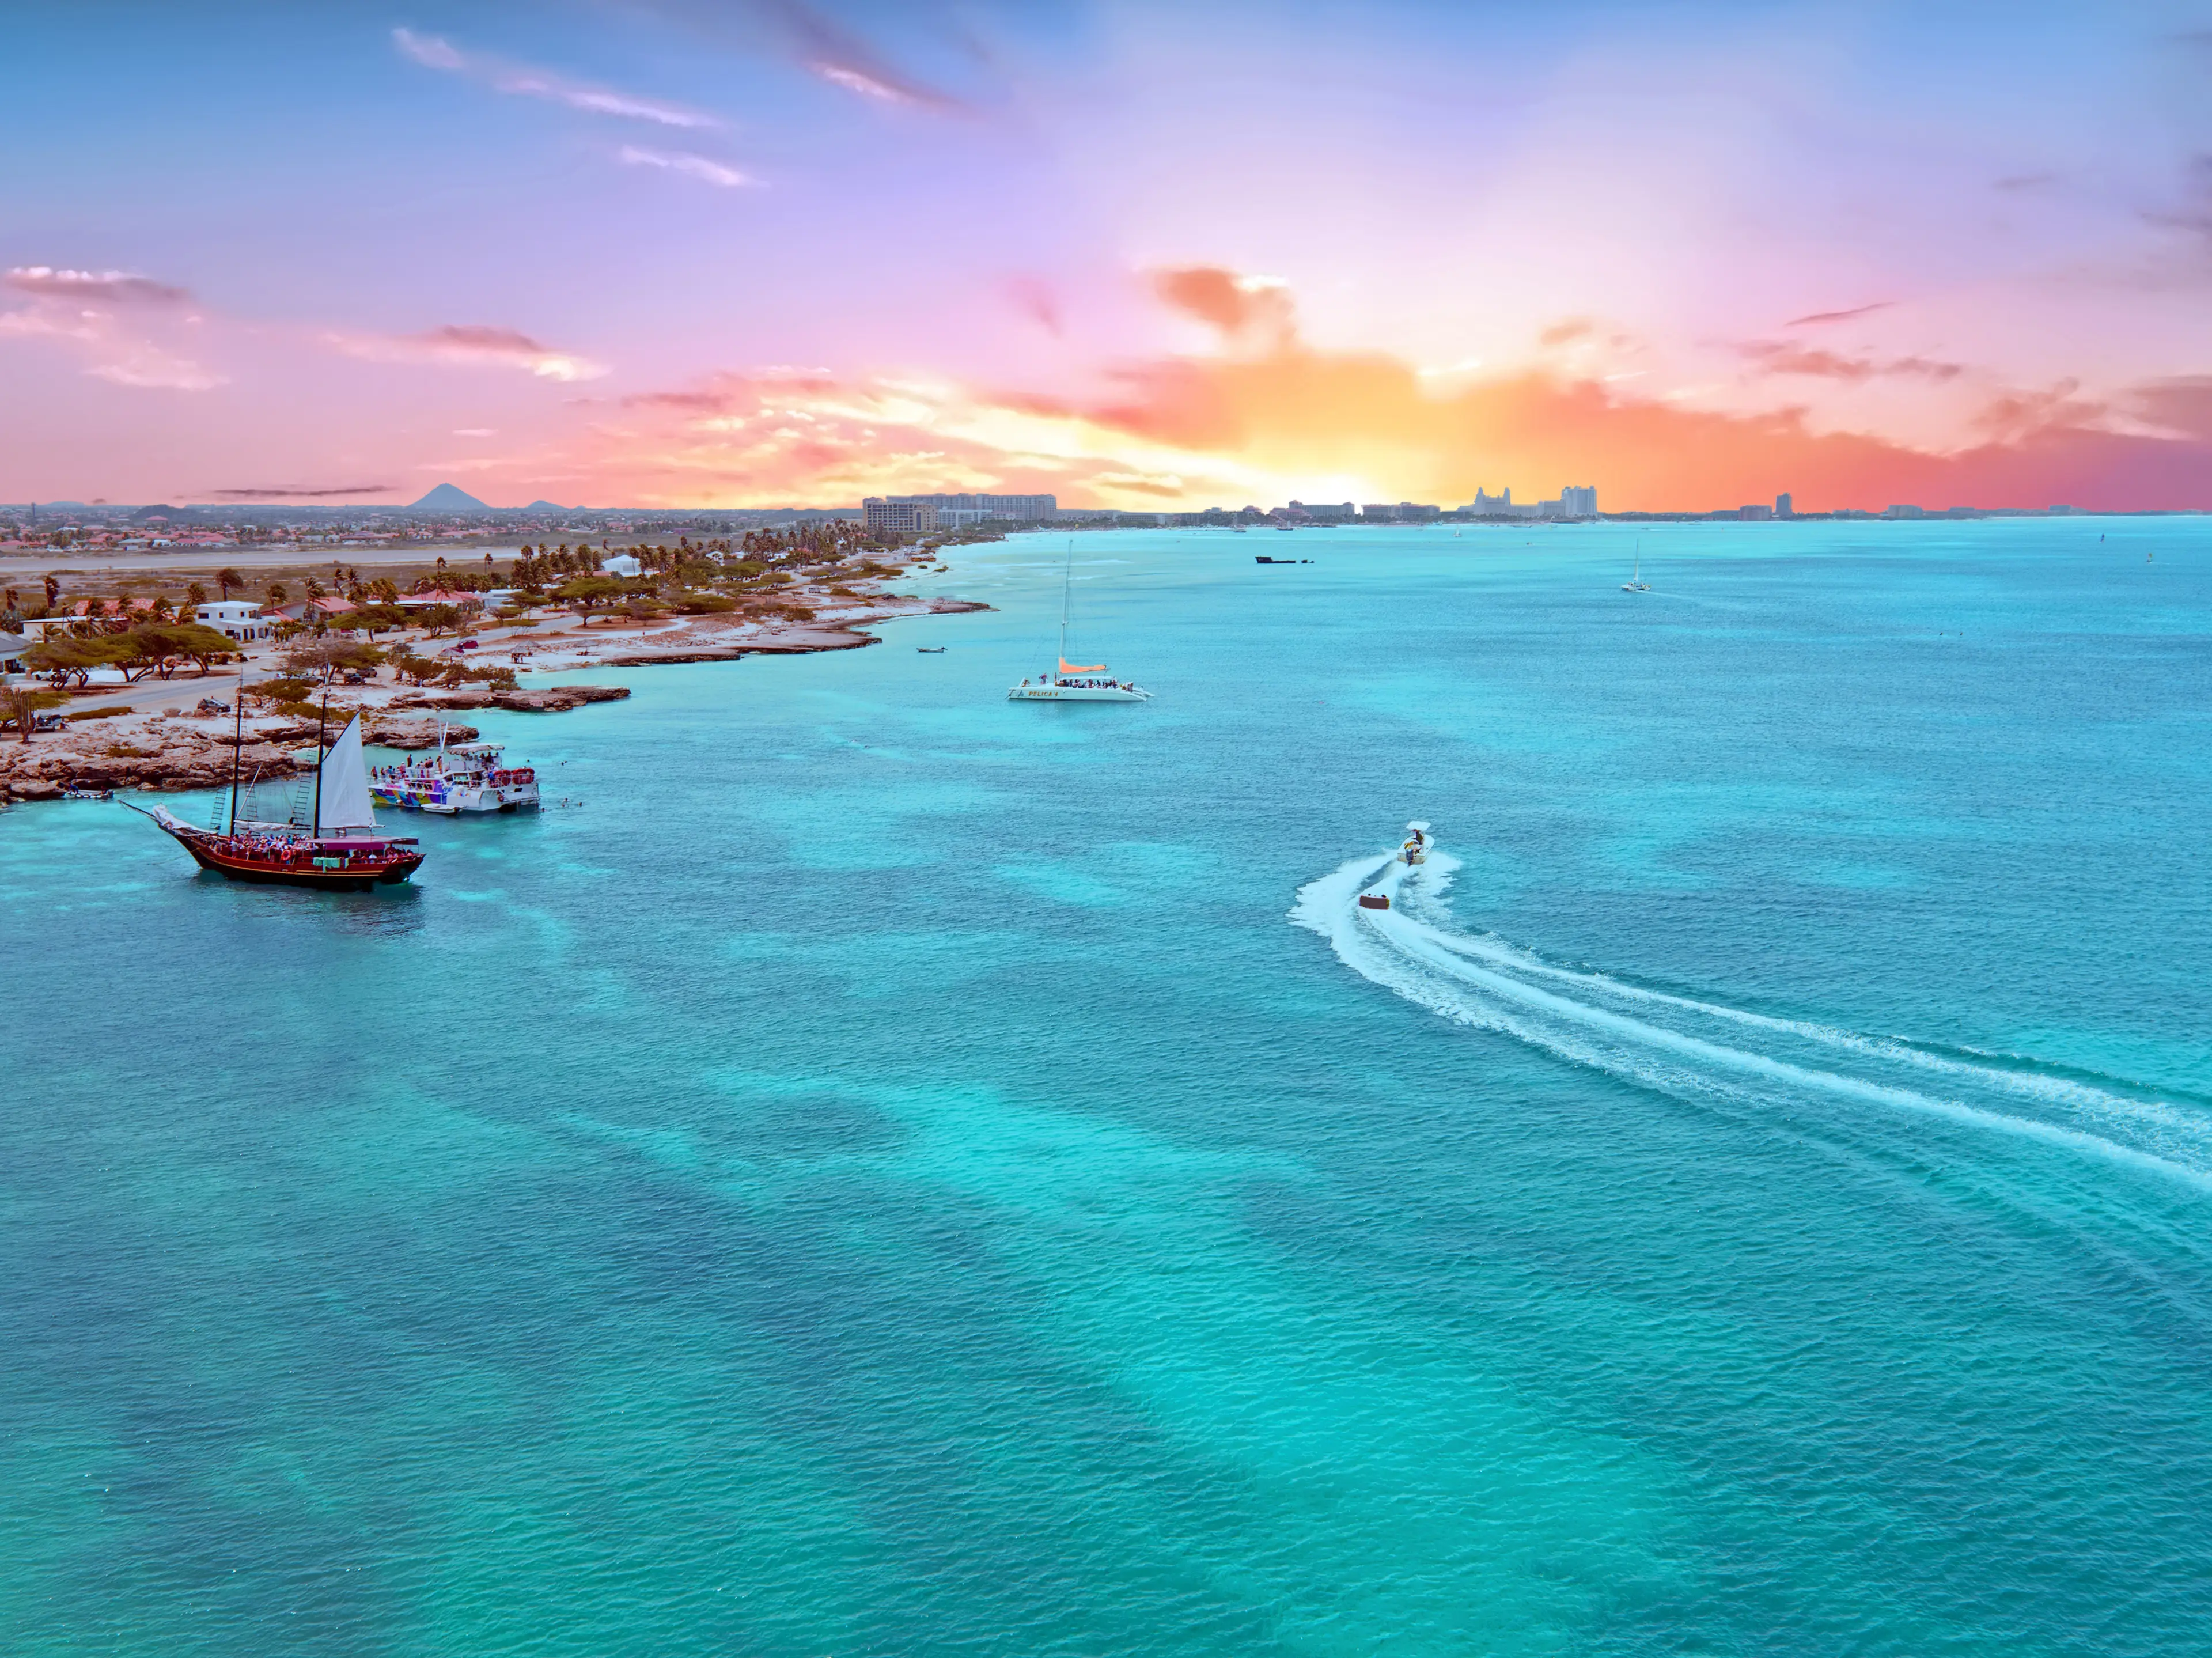 4-Day Family Adventure in Aruba: Local Experience, Cuisine and Sights